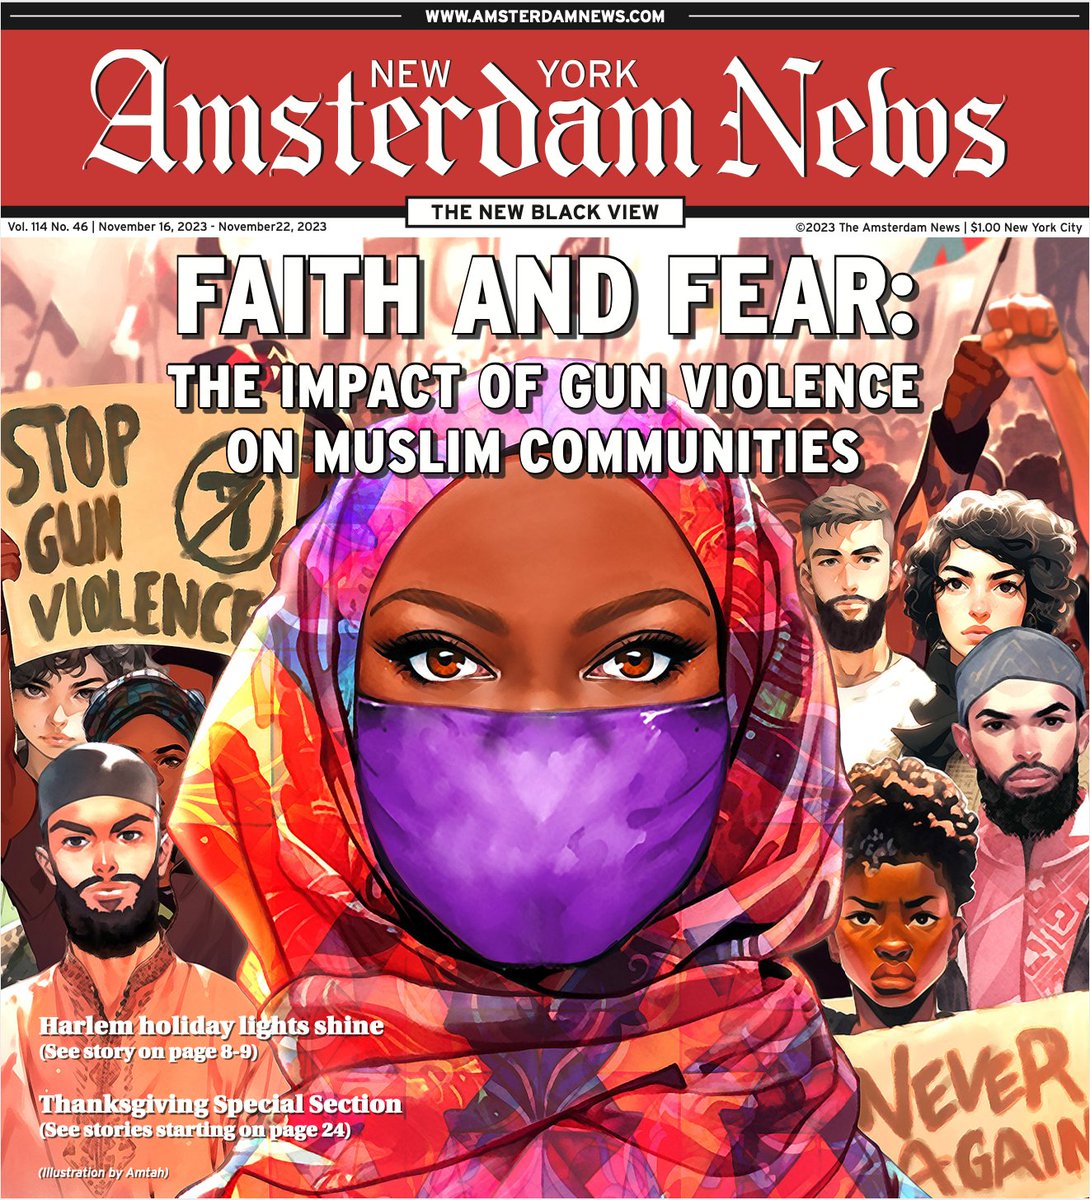 This week's front page. To subscribe, go to amsterdamnews.com/product/subscr…